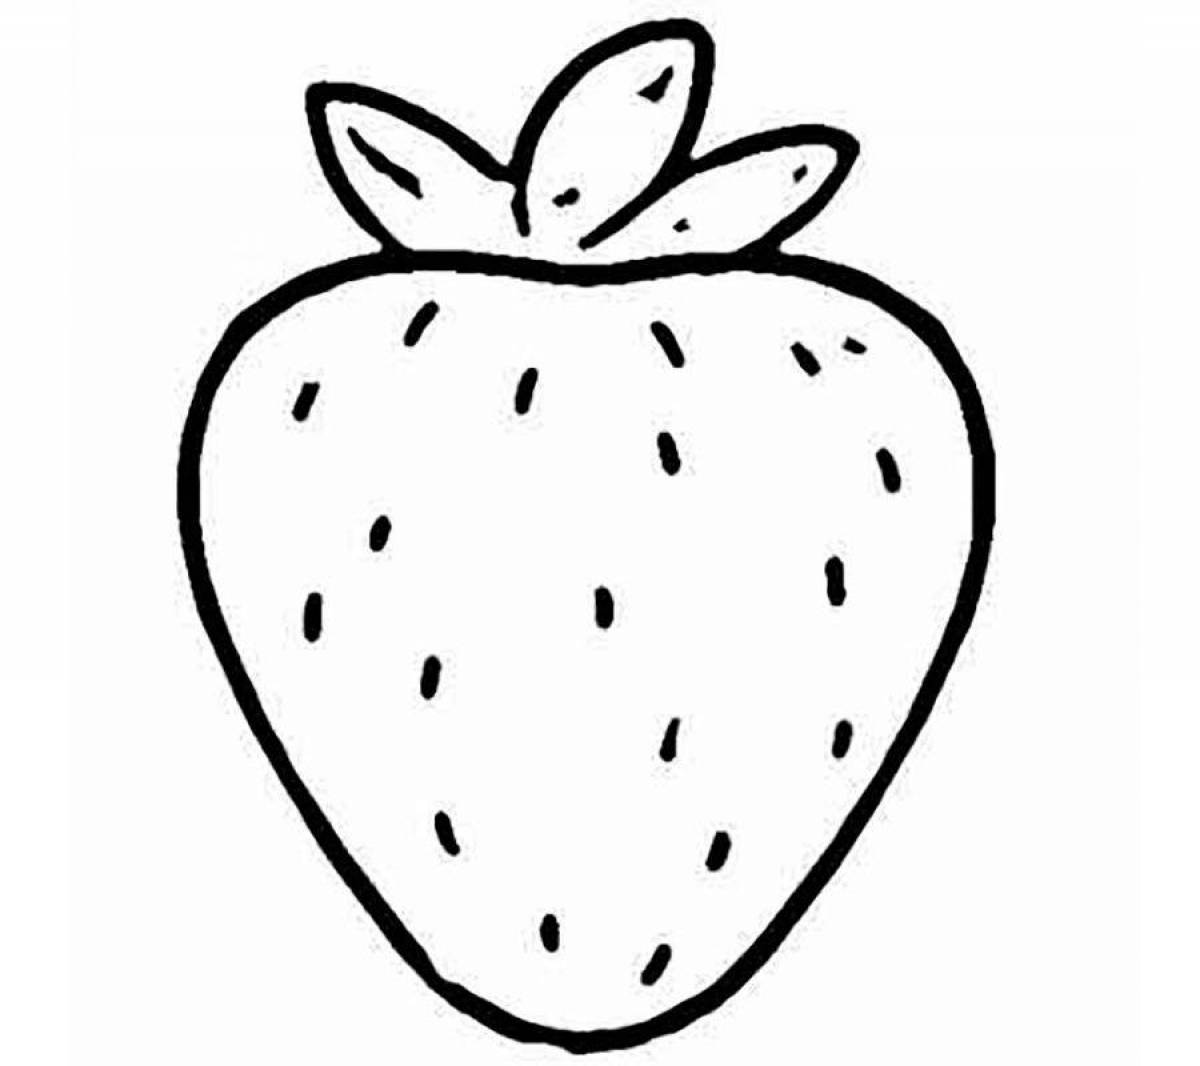 Glorious strawberry coloring book for kids